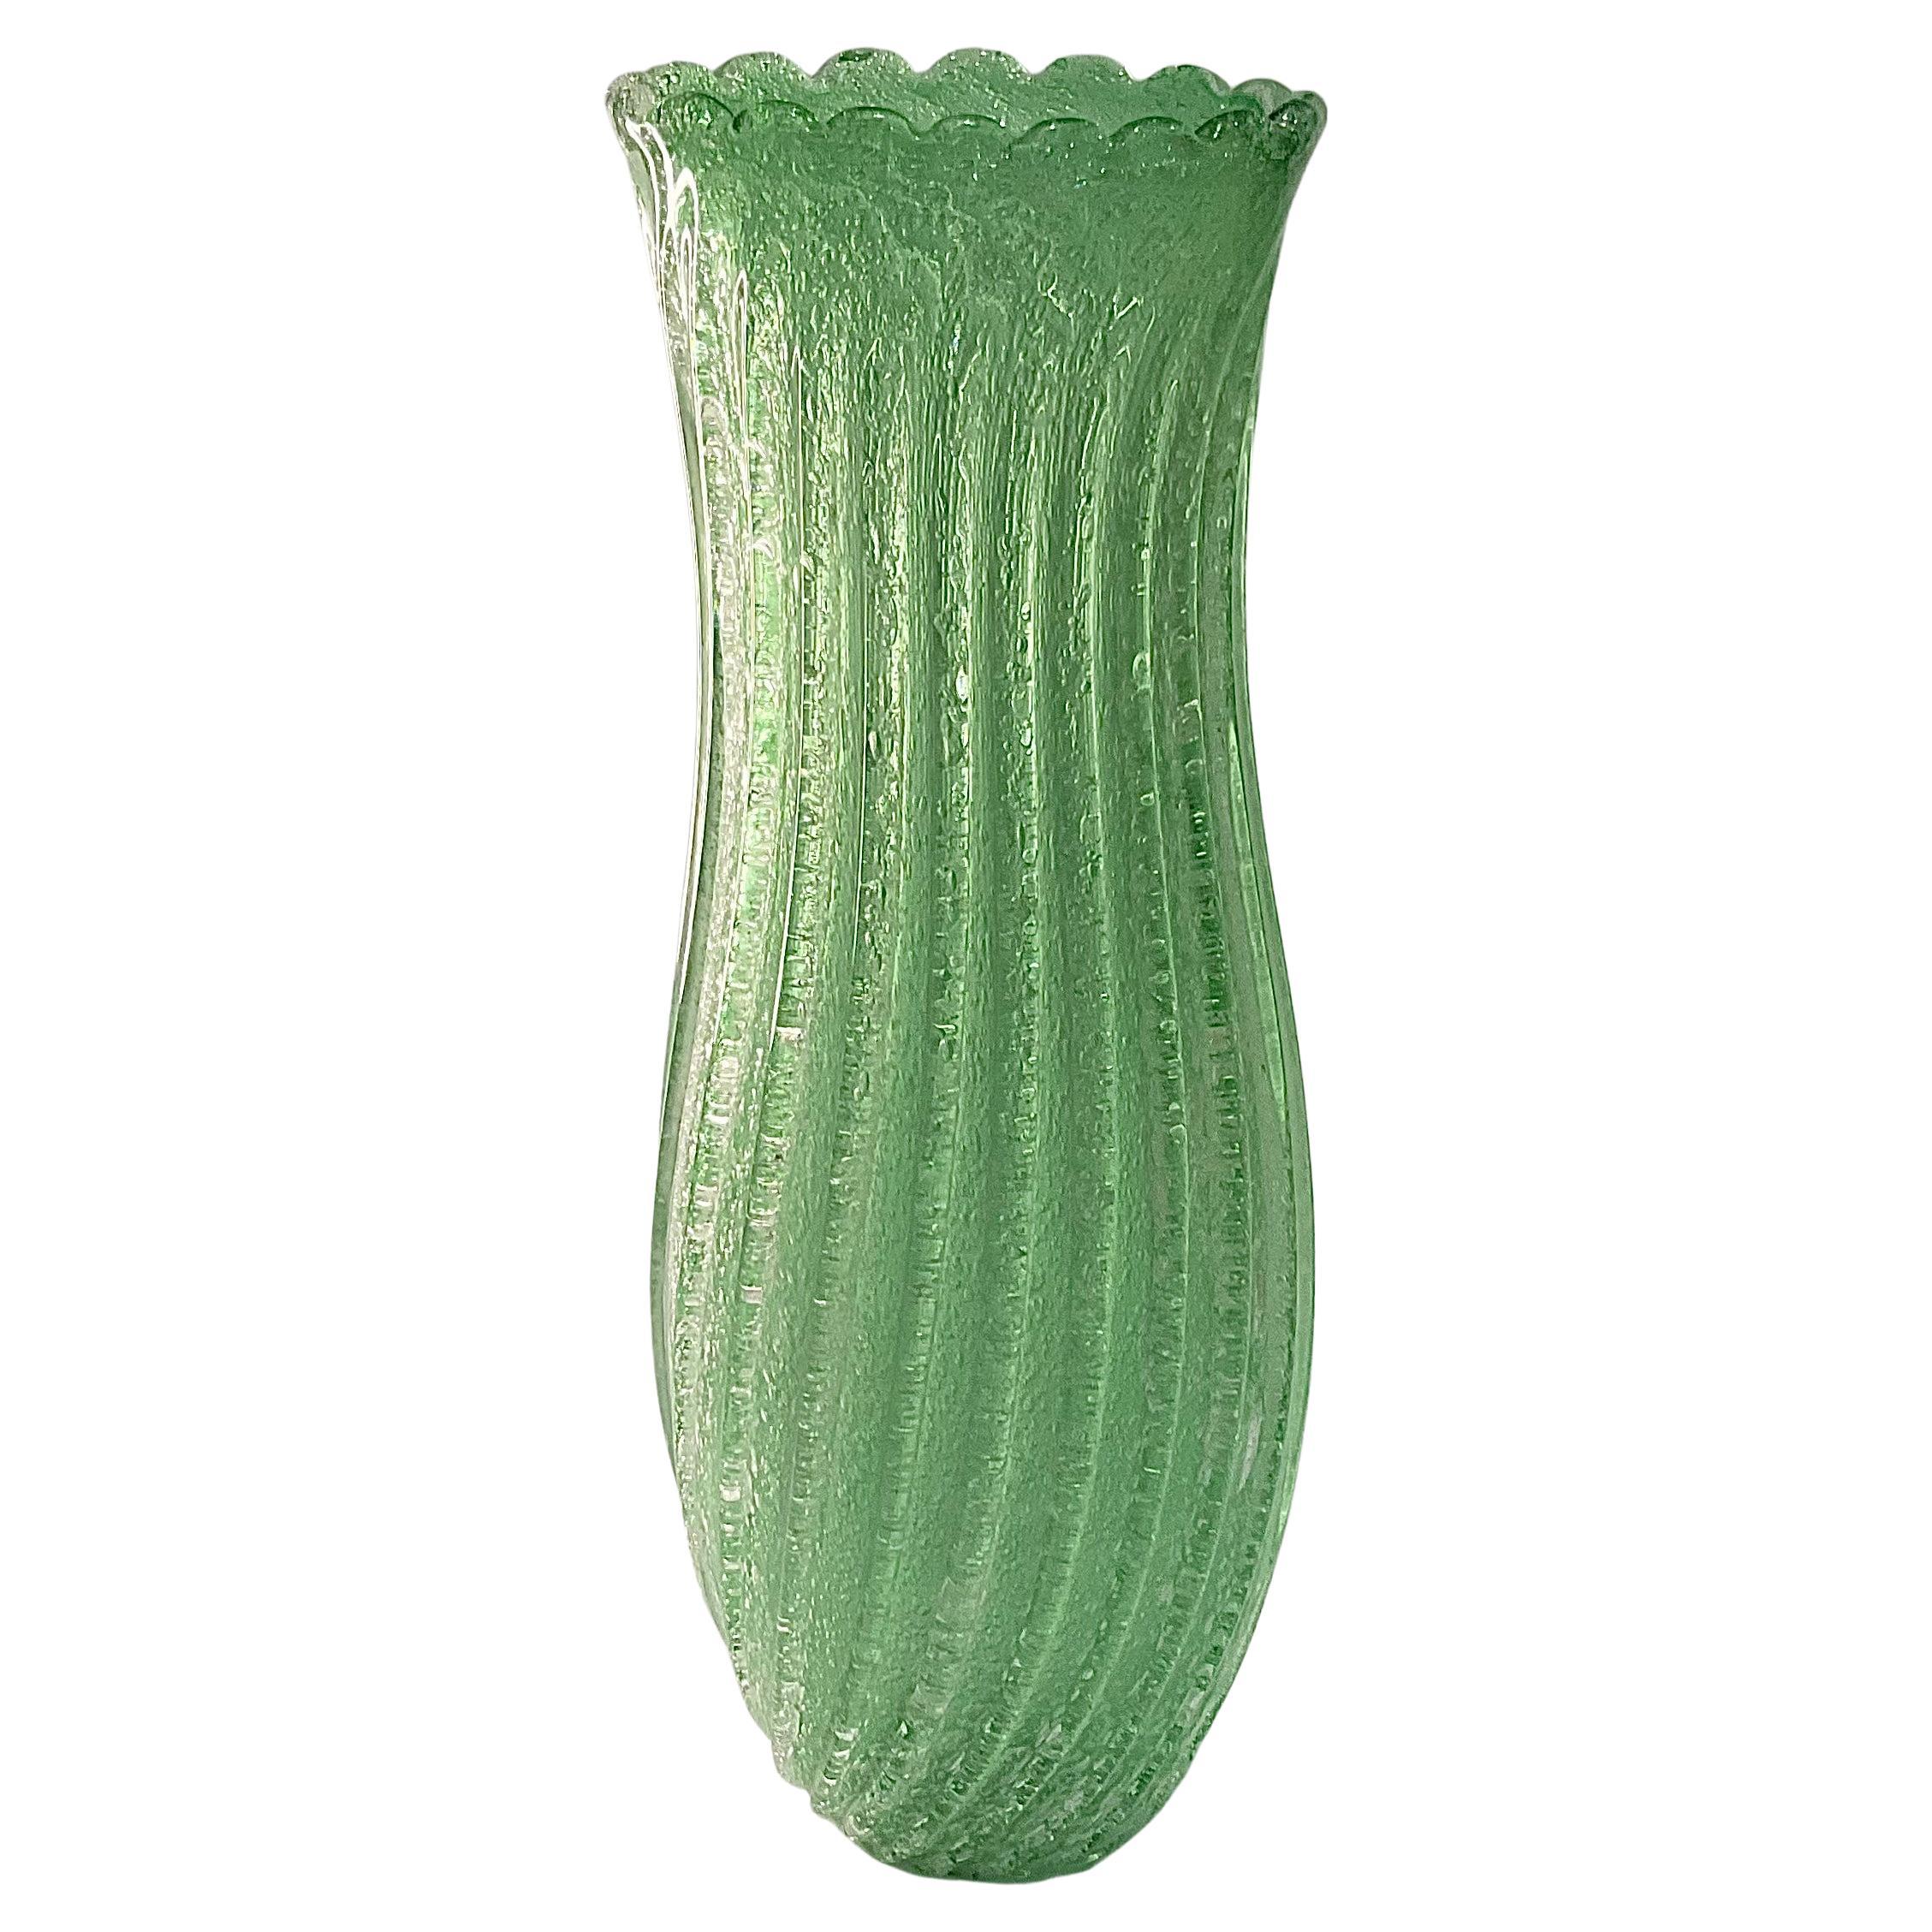 Large Murano Art Glass Vase in Green Pulegoso Glass with Ribbed Design Scalloped For Sale